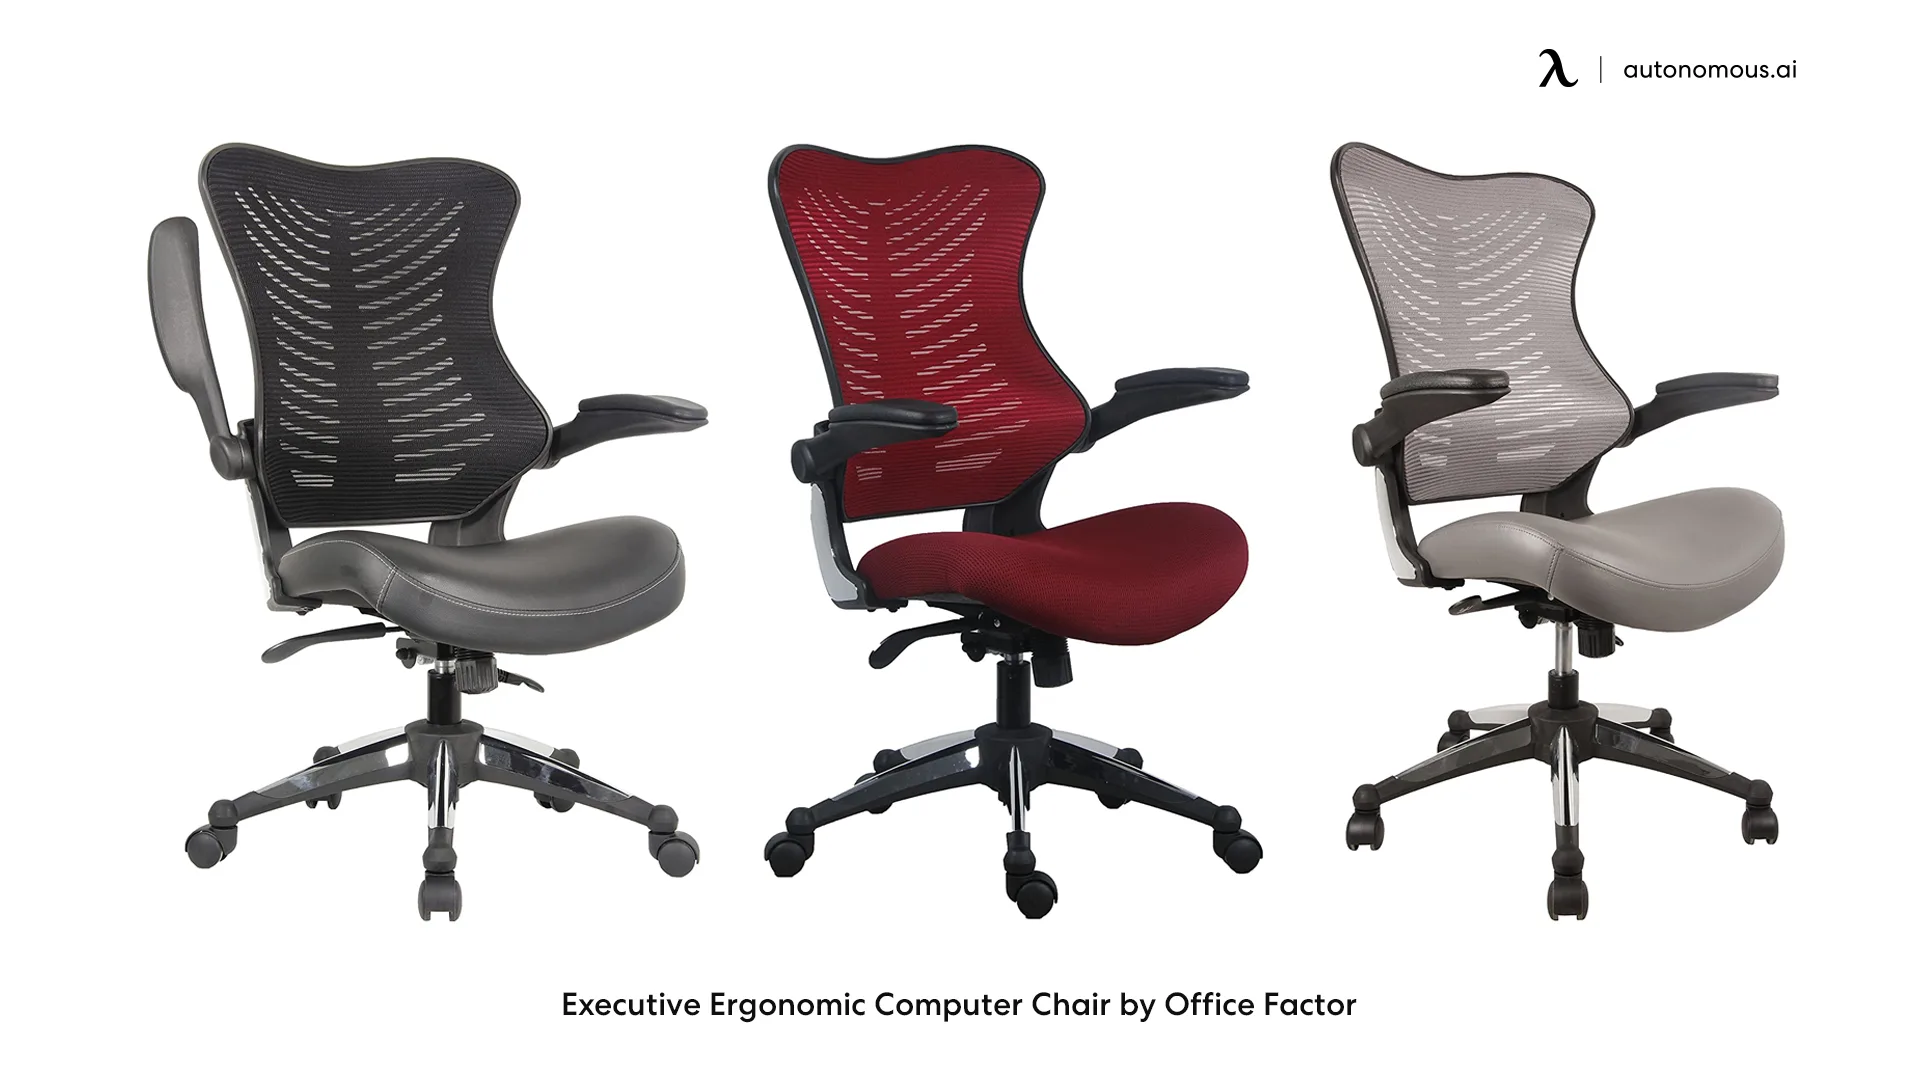 Executive Ergonomic Computer Chair by Office Factor